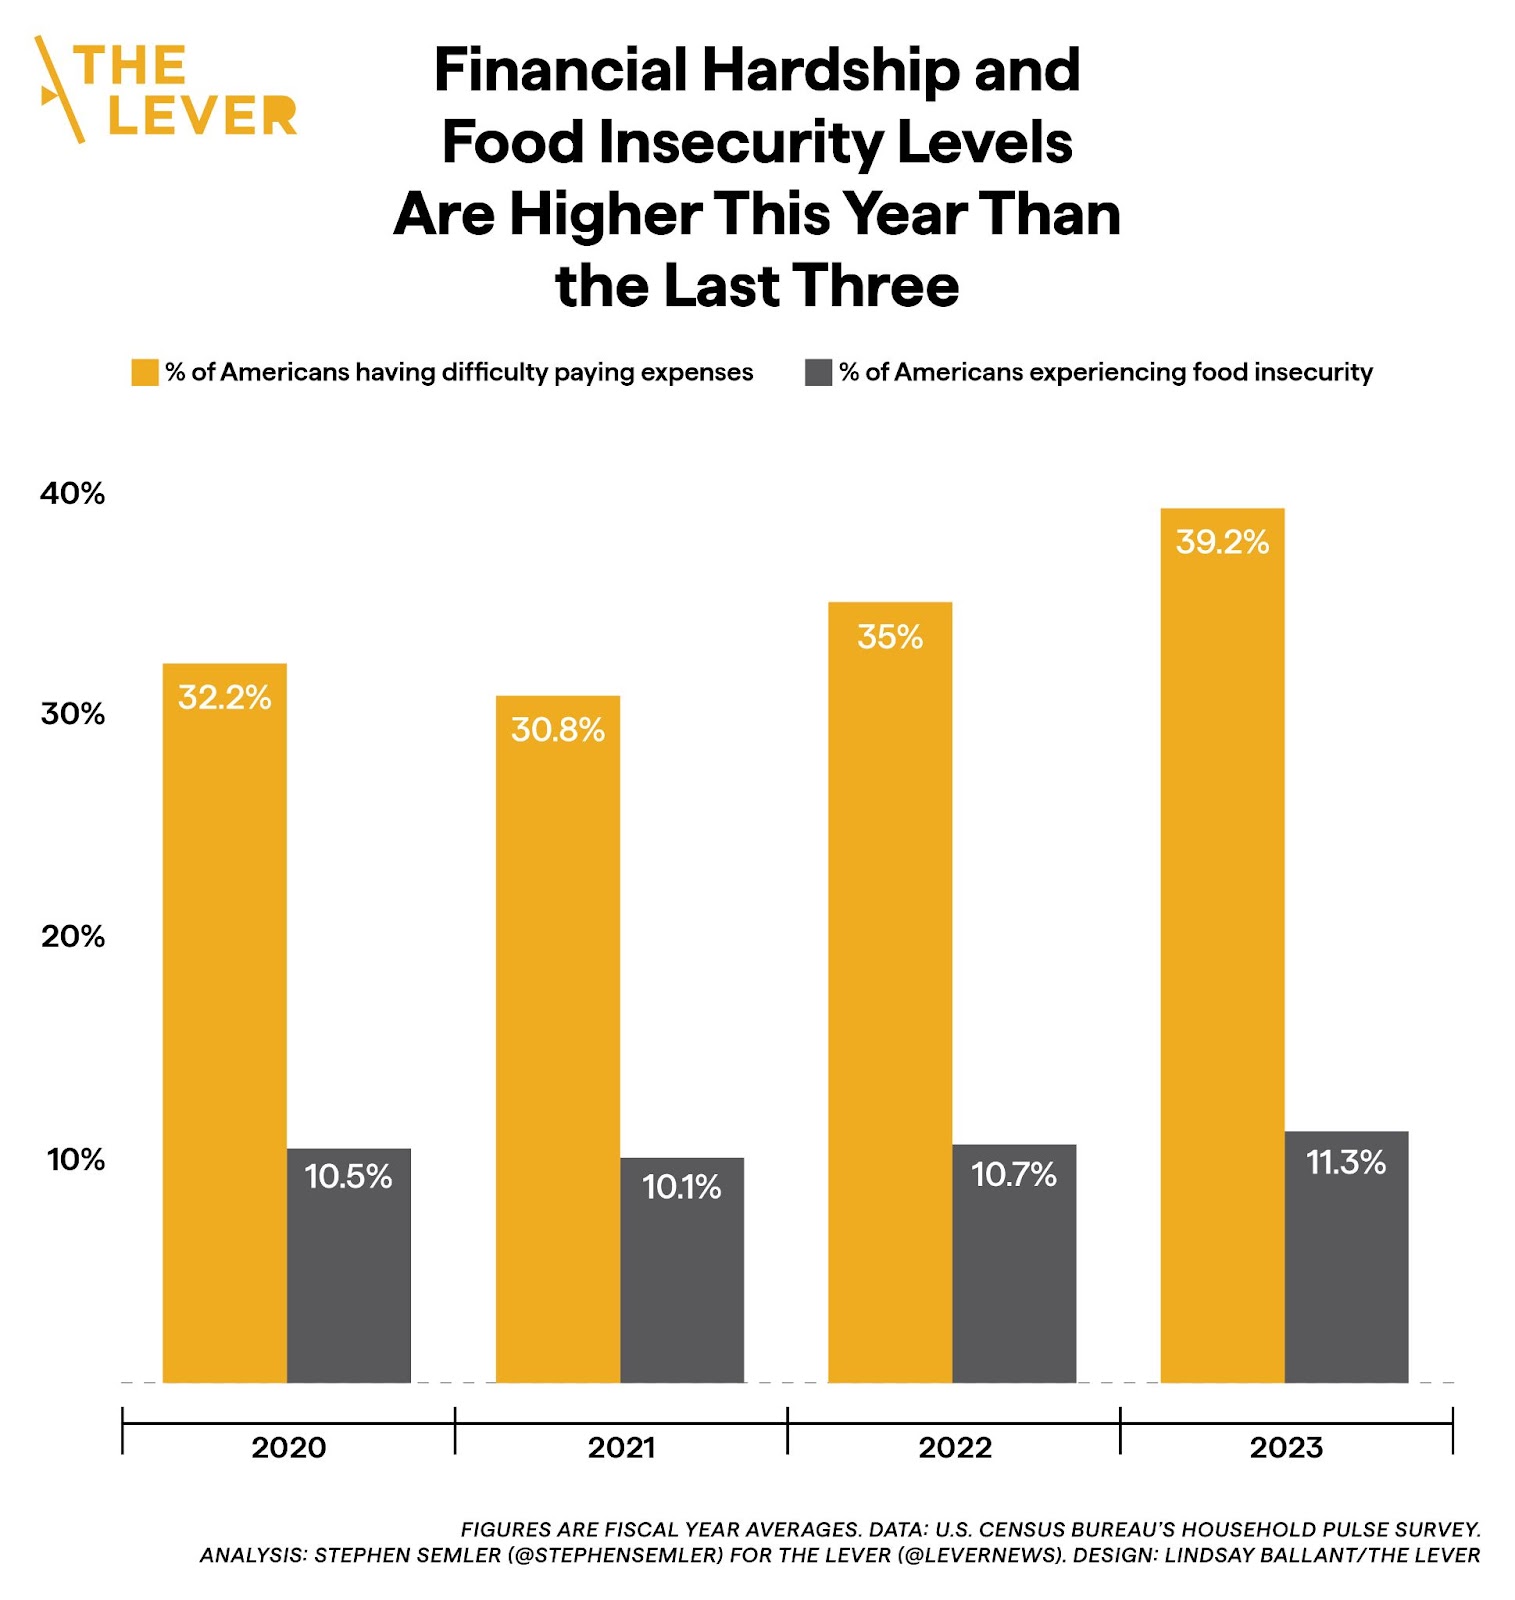 Financial hardship and food insecurity levels are higher this year than the last three. This chart has four pairs of yellow and brown columns for each year from 2020 to so far in 2023. The yellow ones show the percent of Americans struggling to pay their bills, which was 32.2 in 2020, 30.8 in 2021, 35 in 2022, and 39.2 in 2023. The brown columns show the percent of Americans without enough to eat, which was 10.5 in 2020, 10.1 in 2021, 10.7 in 2022, and 11.3 in 2023. Figures are fiscal year averages. Data as of July 2023 via the U.S. Census Bureau’s Household Pulse Survey. Read more at levernews.com. Chart by Stephen Semler (@stephensemler) for The Lever (@levernews).